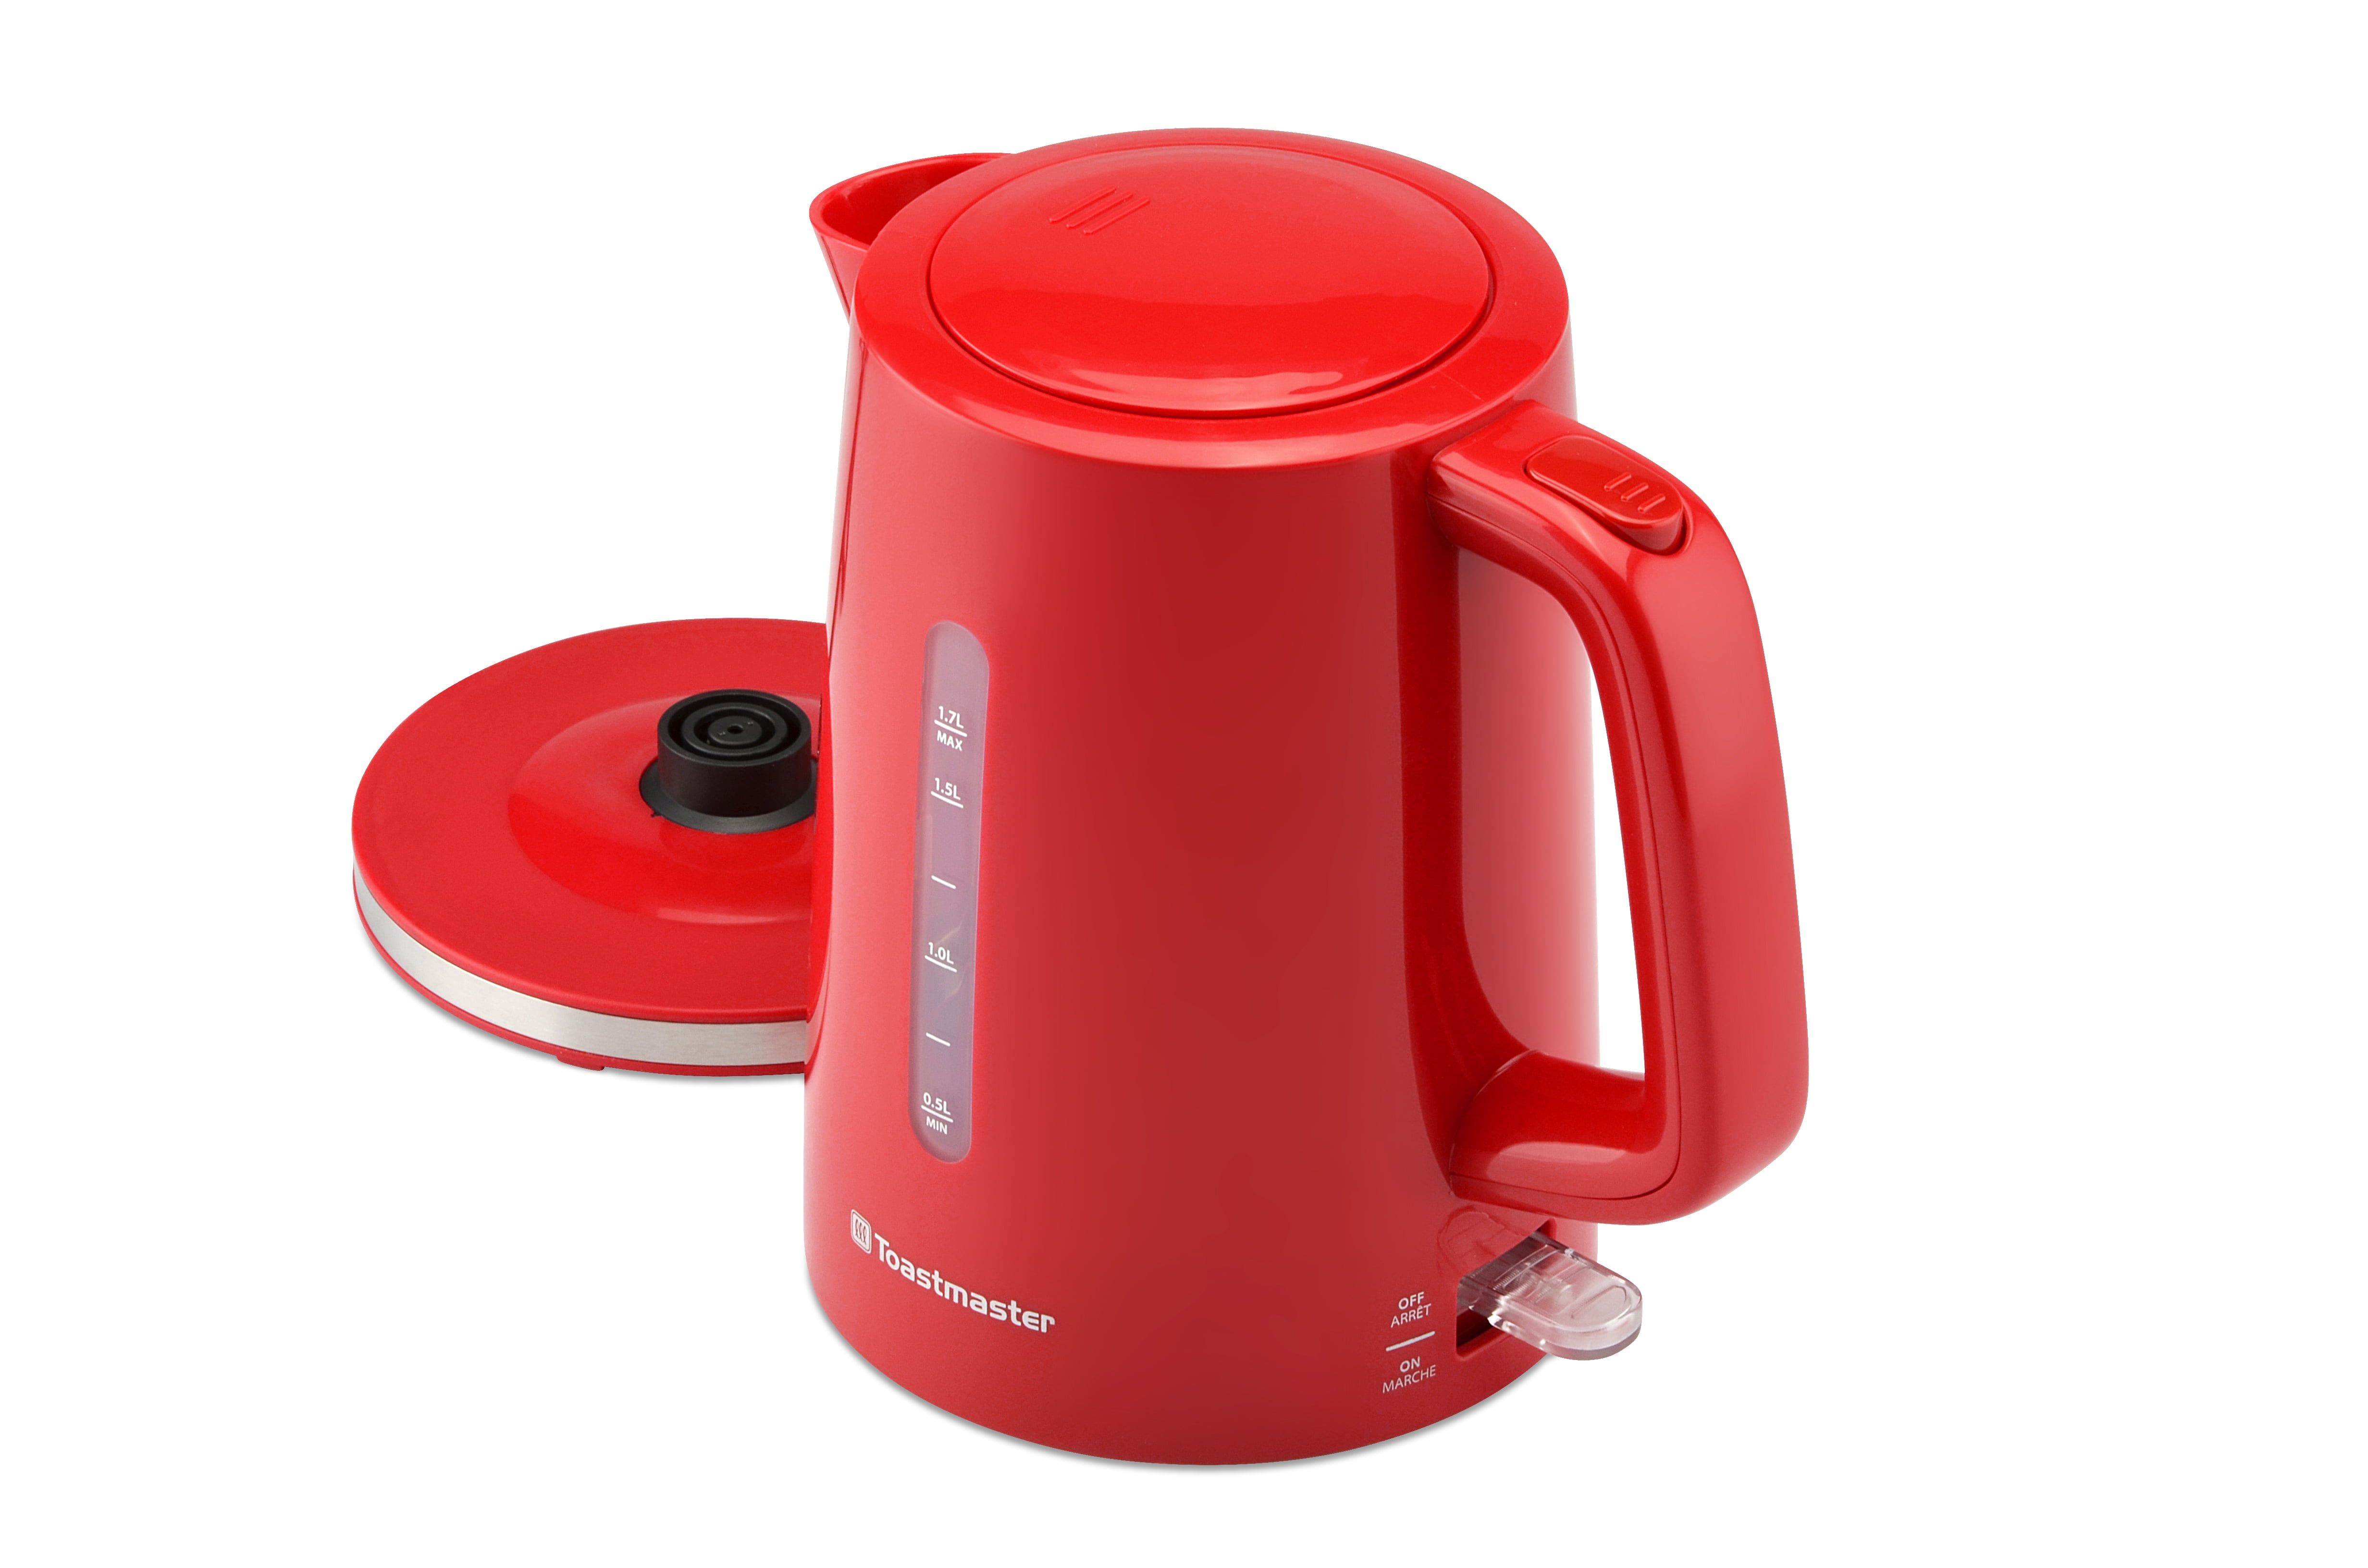 MegaChef 7 Cup Electric Tea Kettle and 2 Slice Toaster Combo in Red  985120246M - The Home Depot